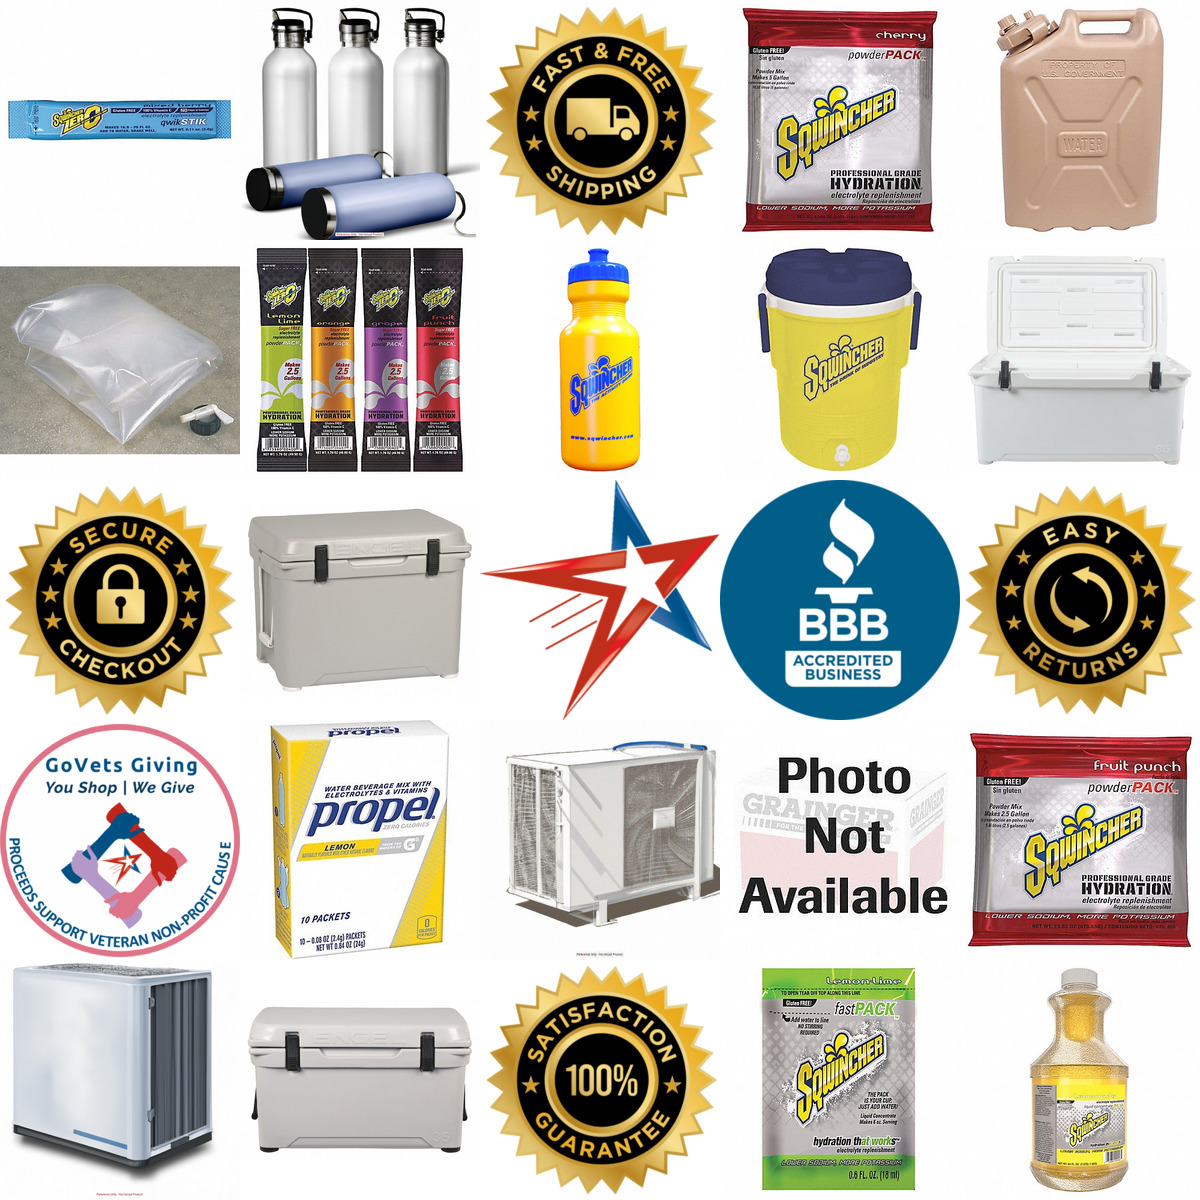 A selection of Portable Coolers and Beverages products on GoVets